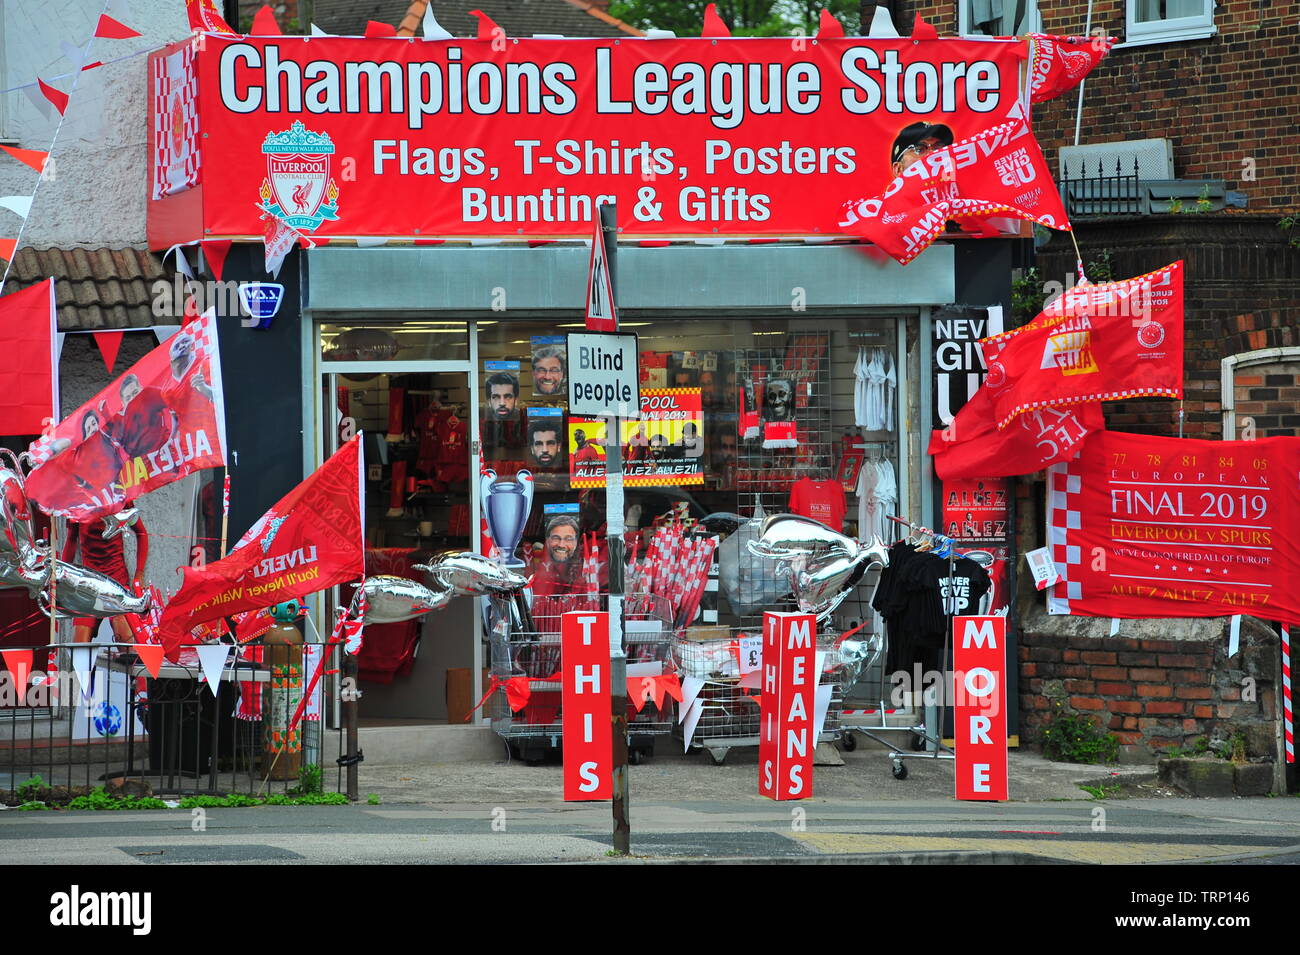 Pop-up Stores in Liverpool Champions League vor 2019 Champions League Finale zwischen Liverpool und Tottenham Hotspur. Stockfoto